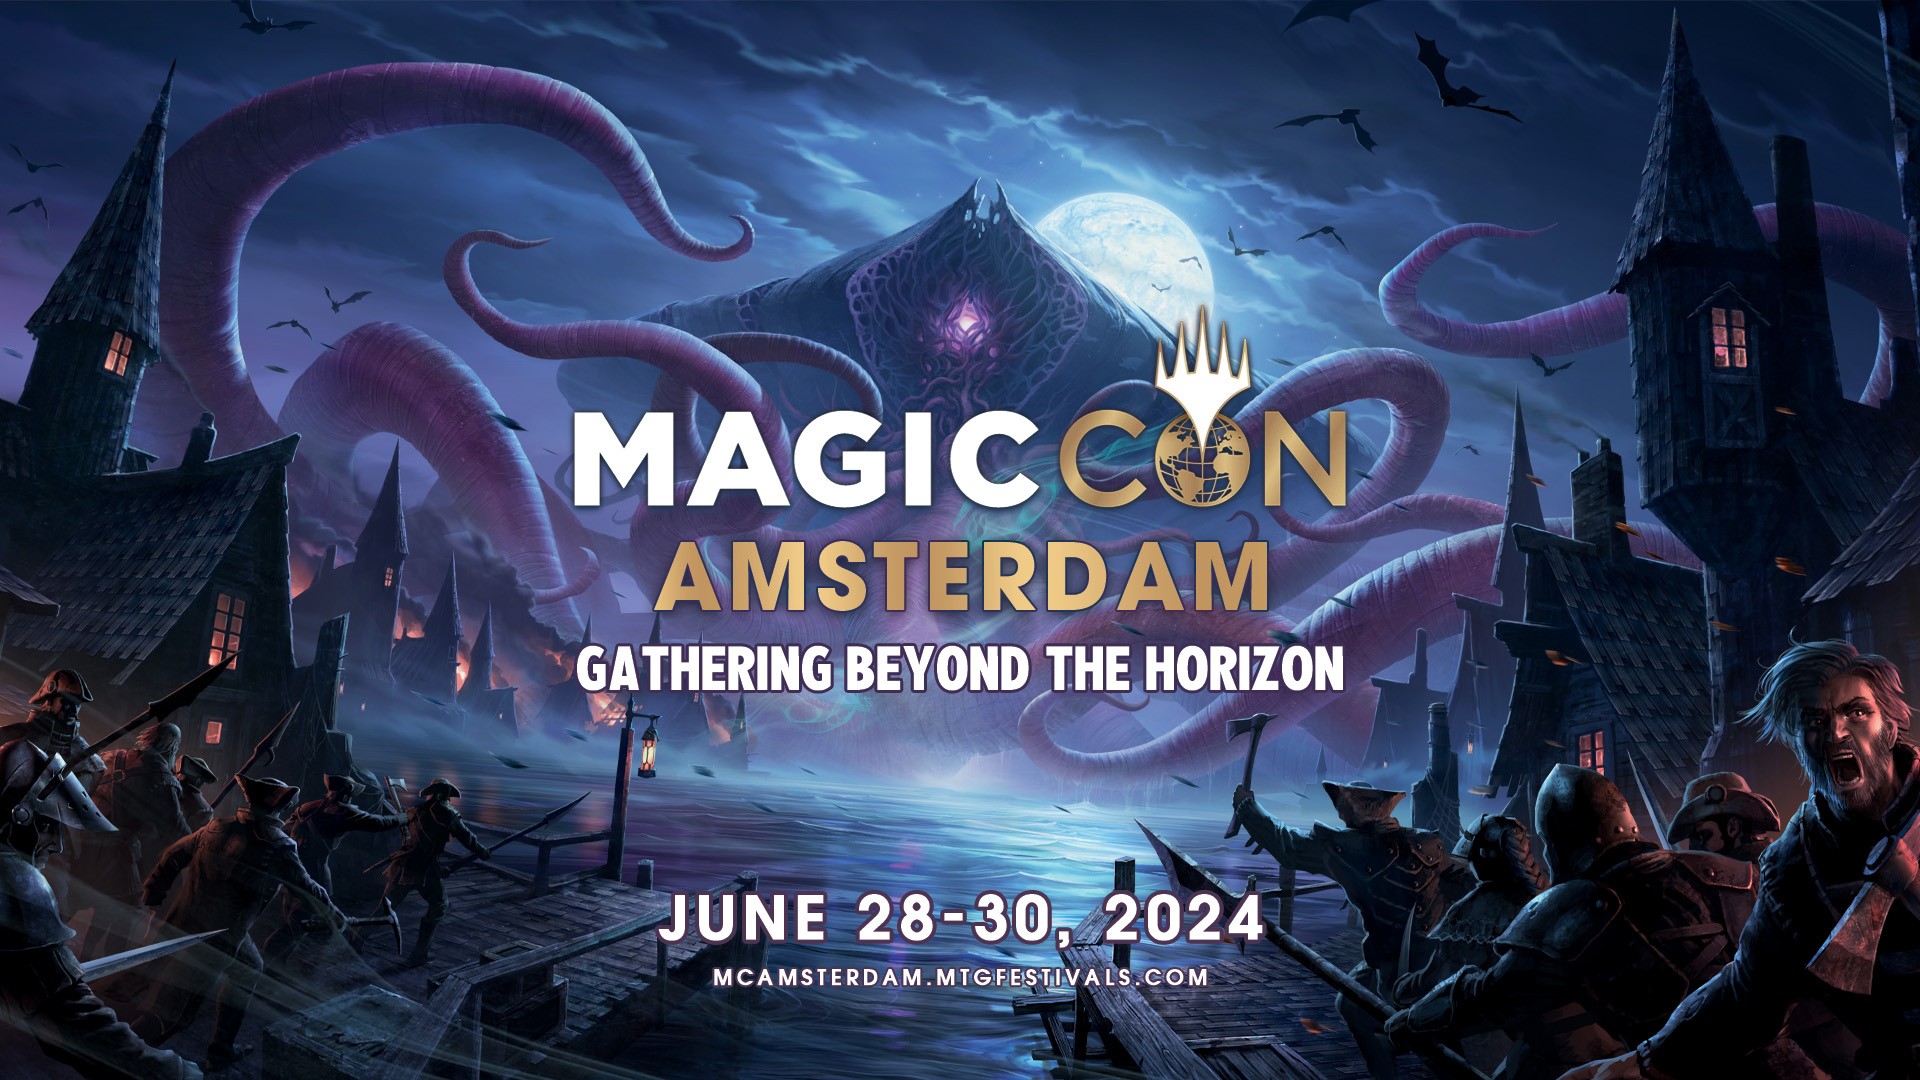 MTG Gives First Look At Promos For MagicCon: Amsterdam